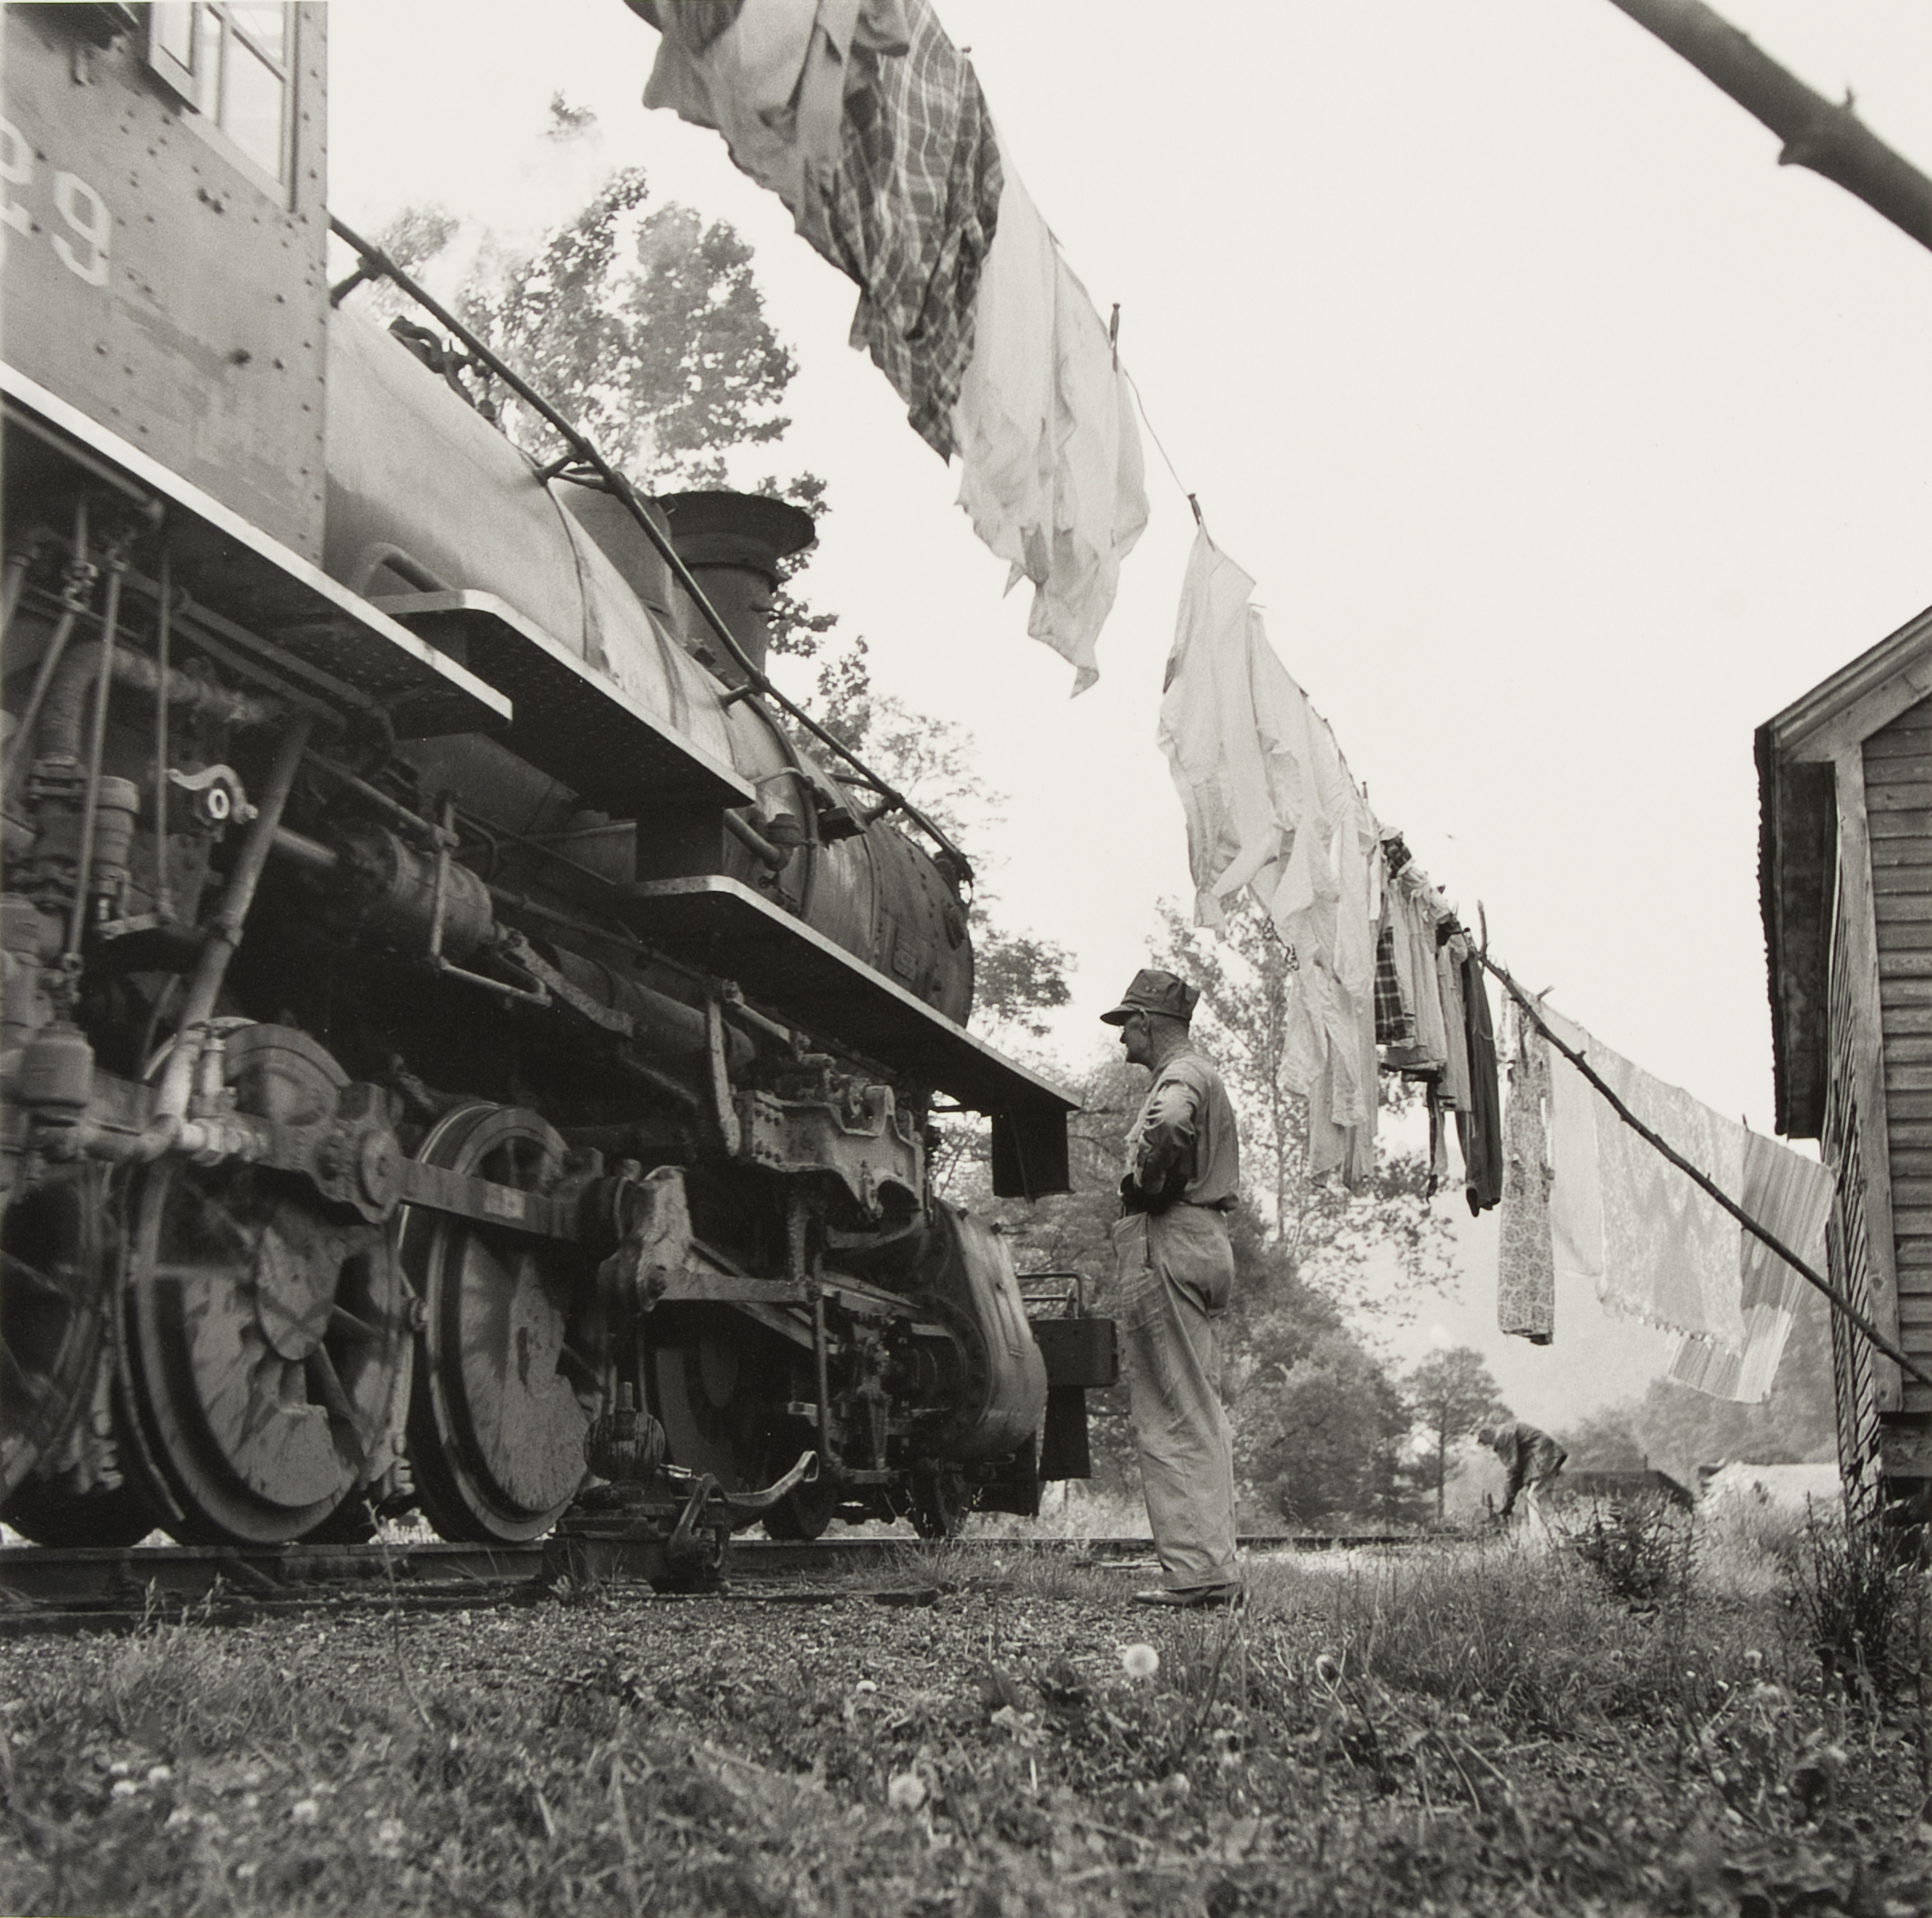 Ralph White, Abingdon Branch Conductor, and Laundry on the Line